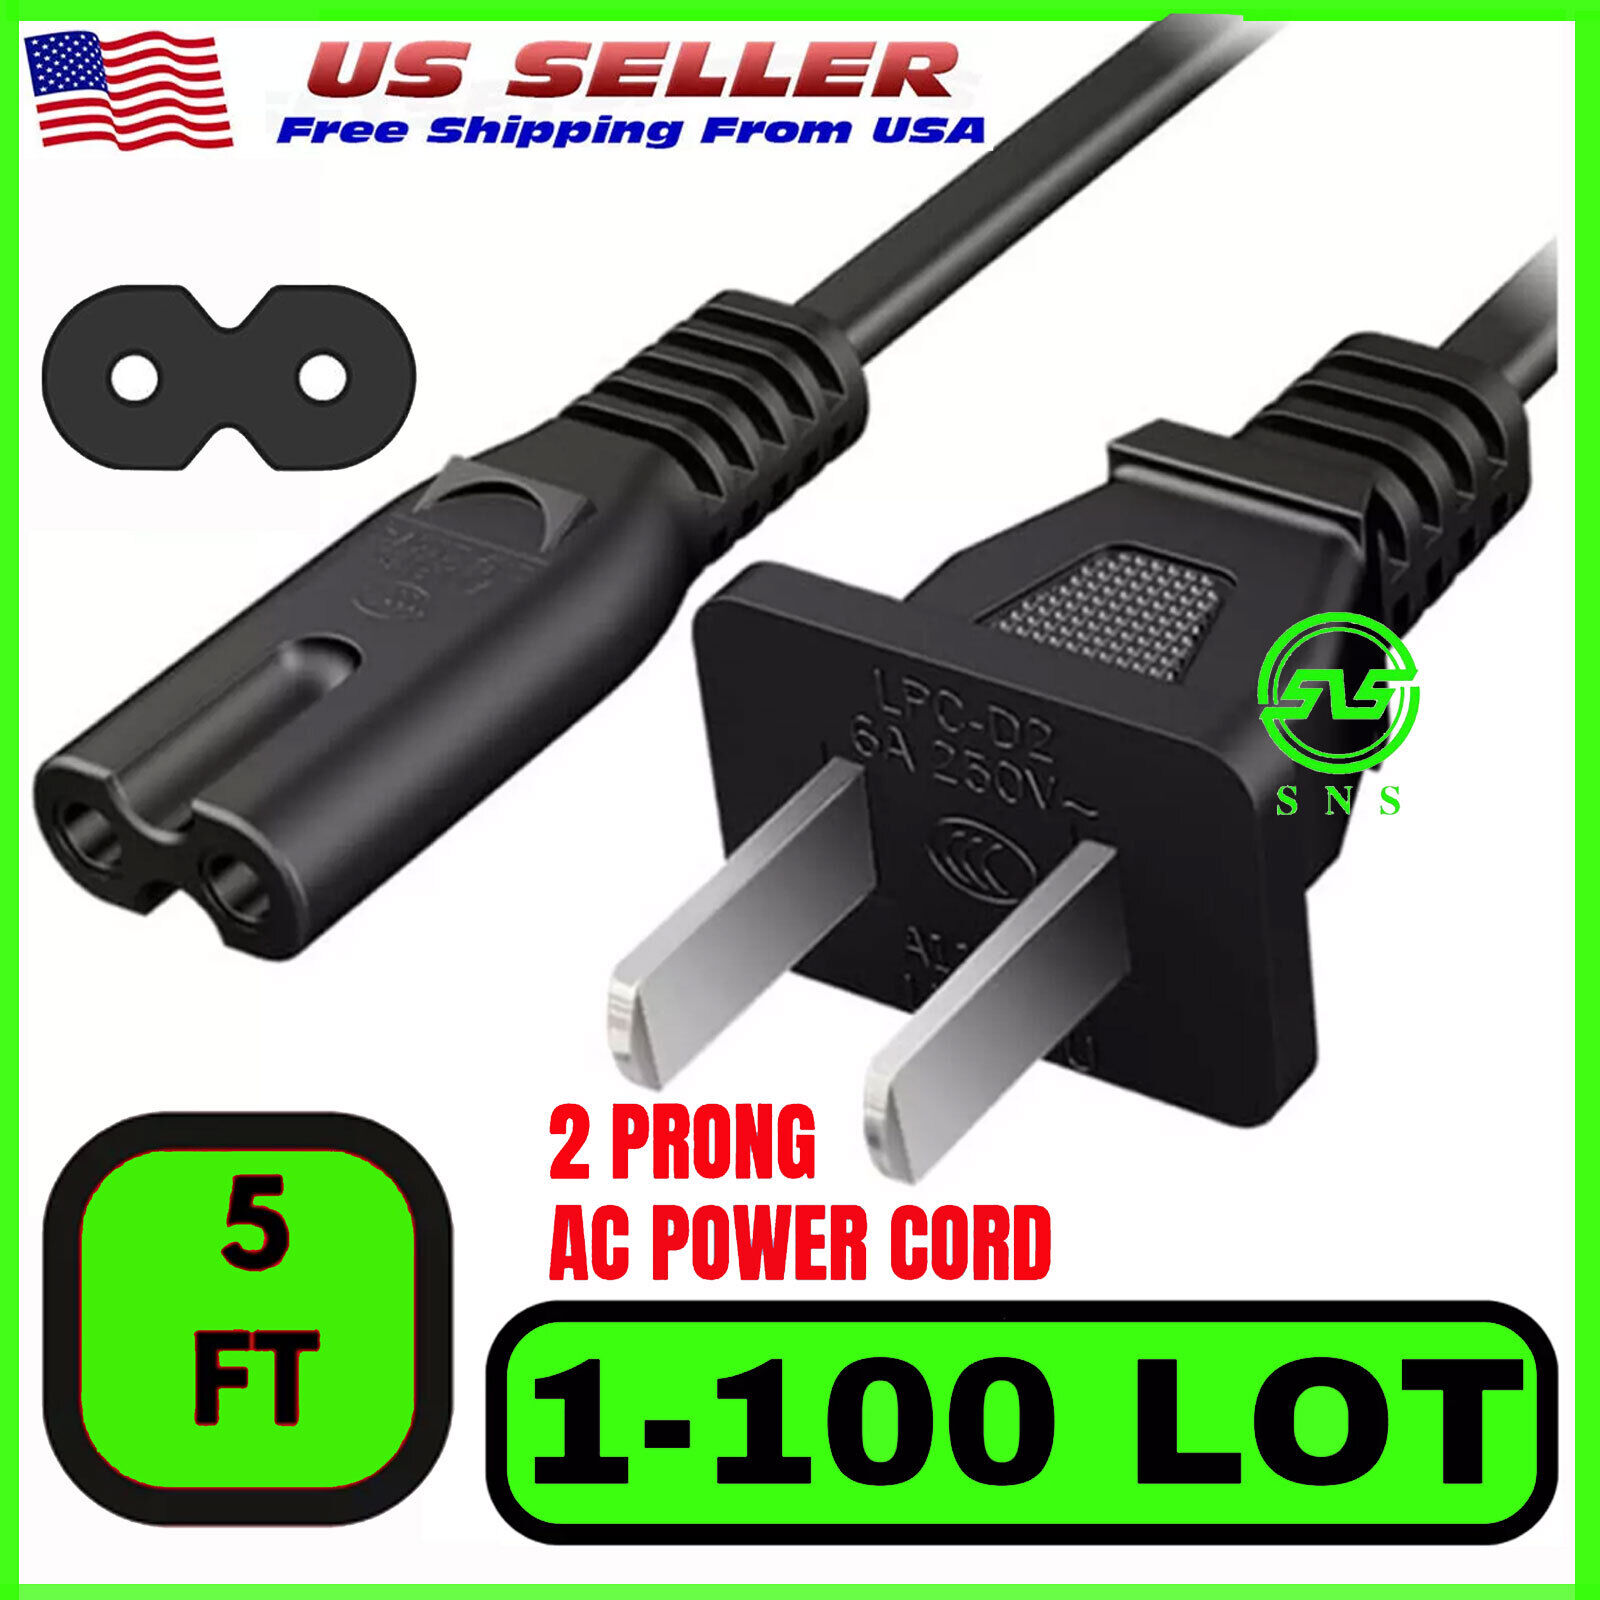 AC Power Cord Cable for PS4 & PS3 PS2 Slim Super Slim XBOX PC 2 Prong 1-100 LOT